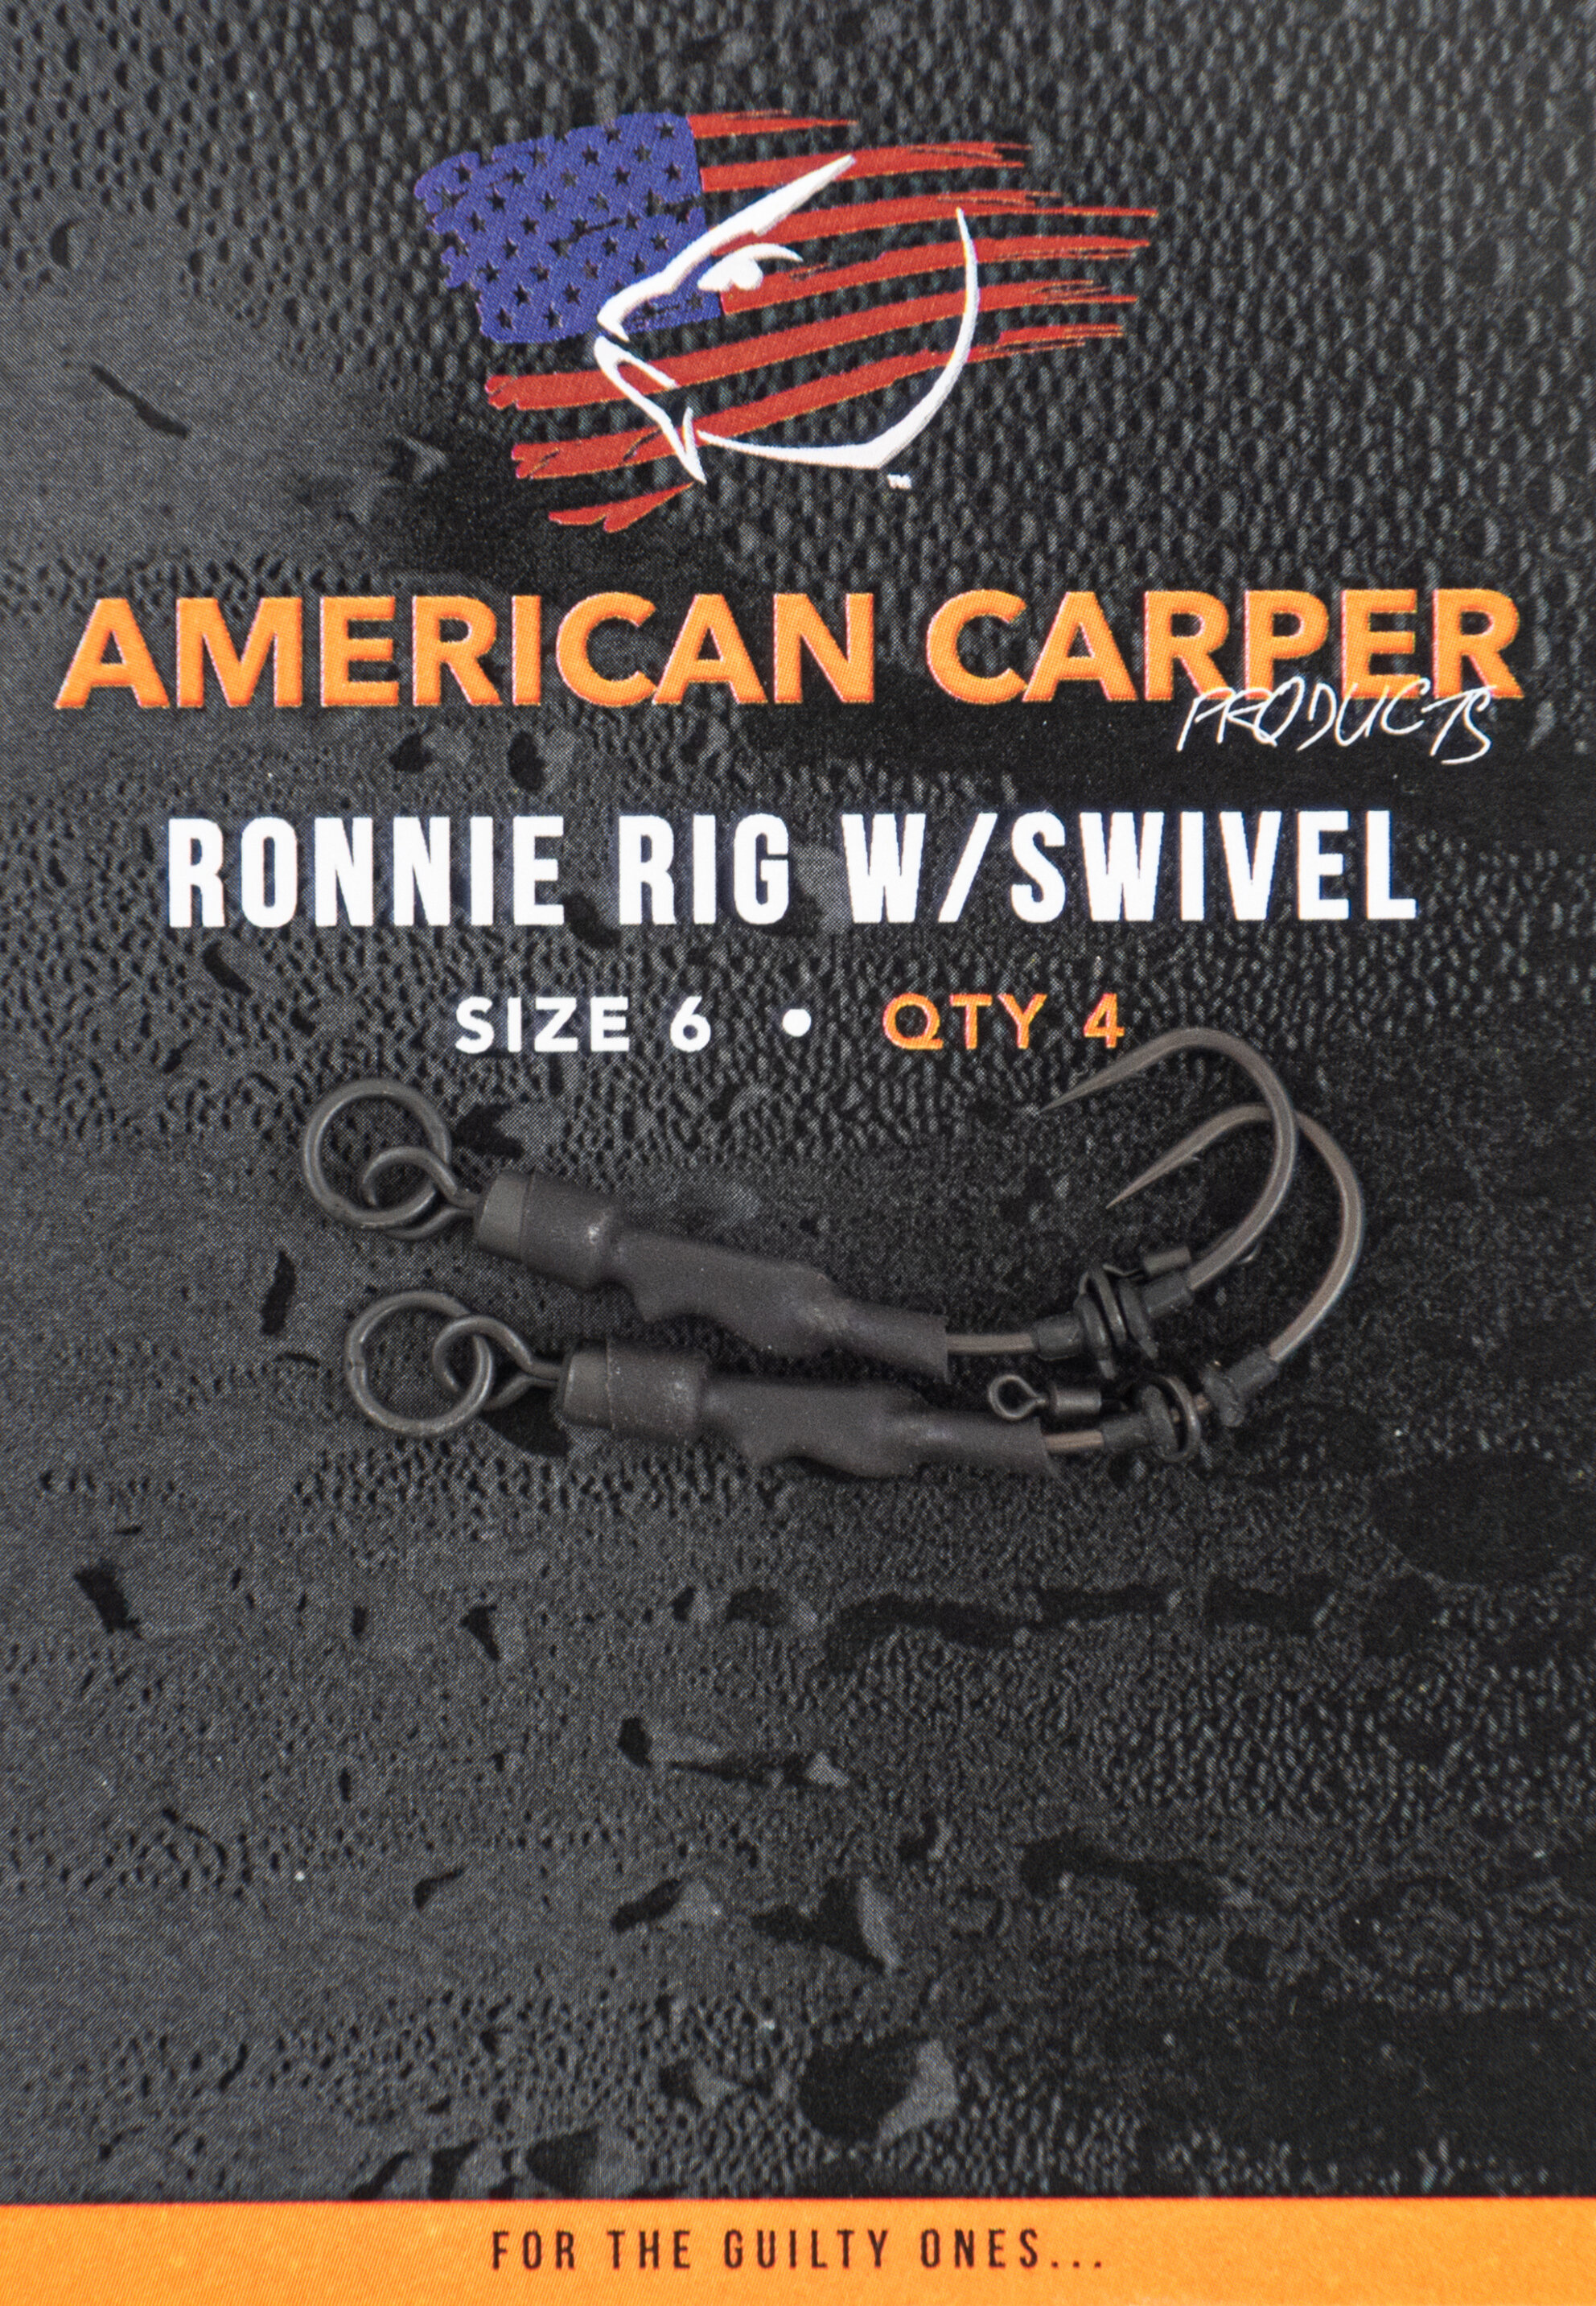 RONNIE RIG WITH SWIVEL CROPPED.jpg